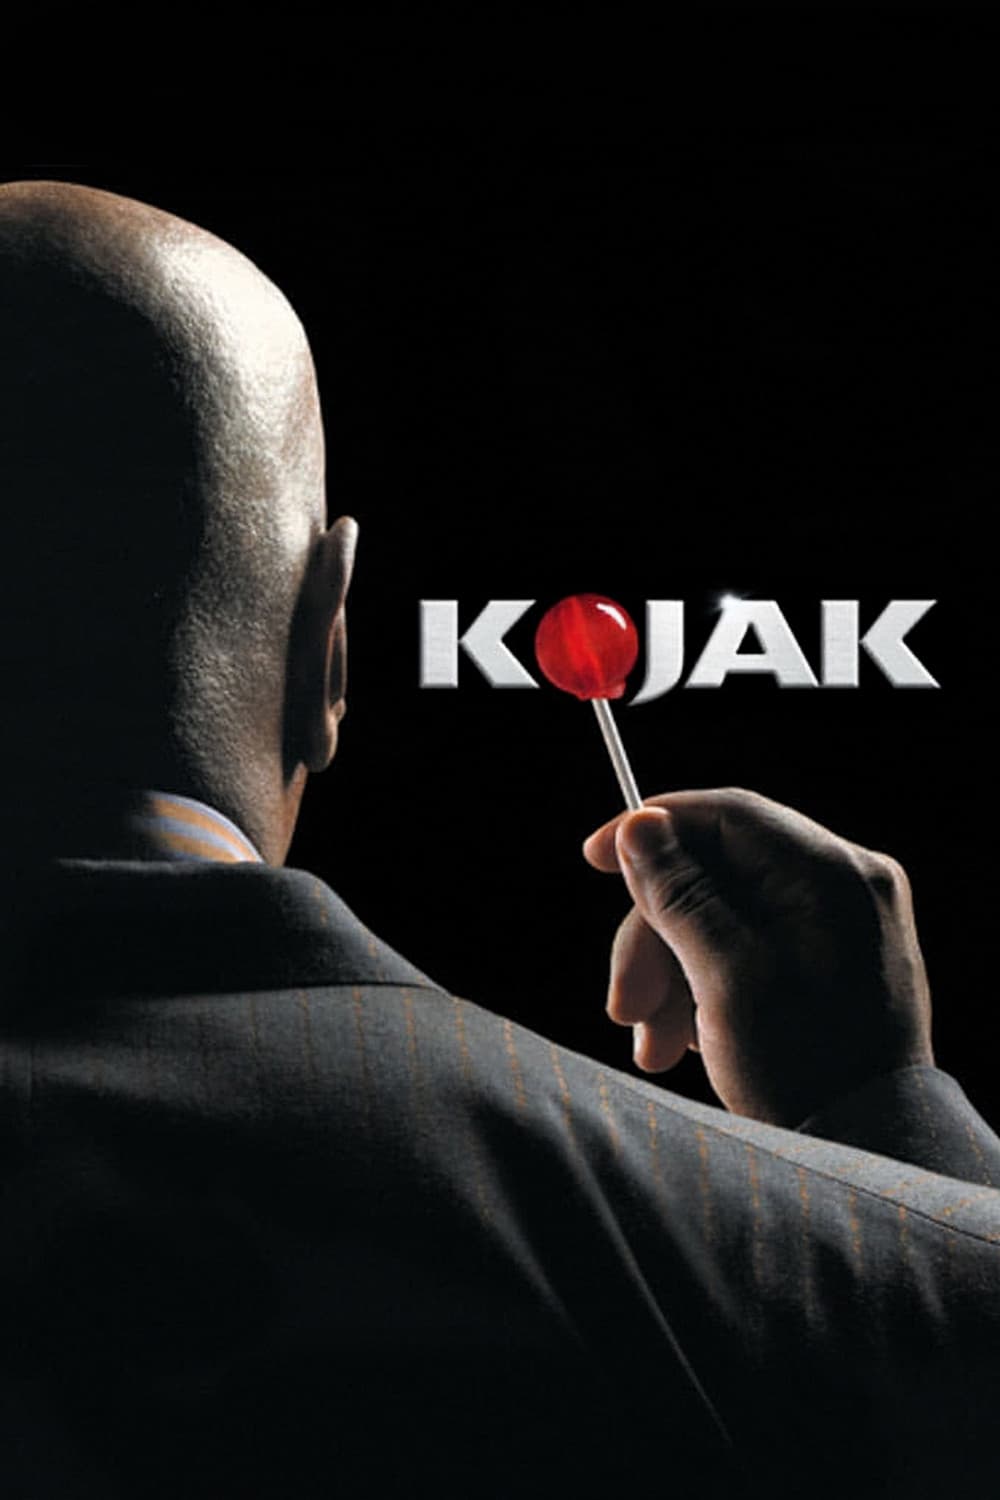 Kojak TV Shows About Police Department